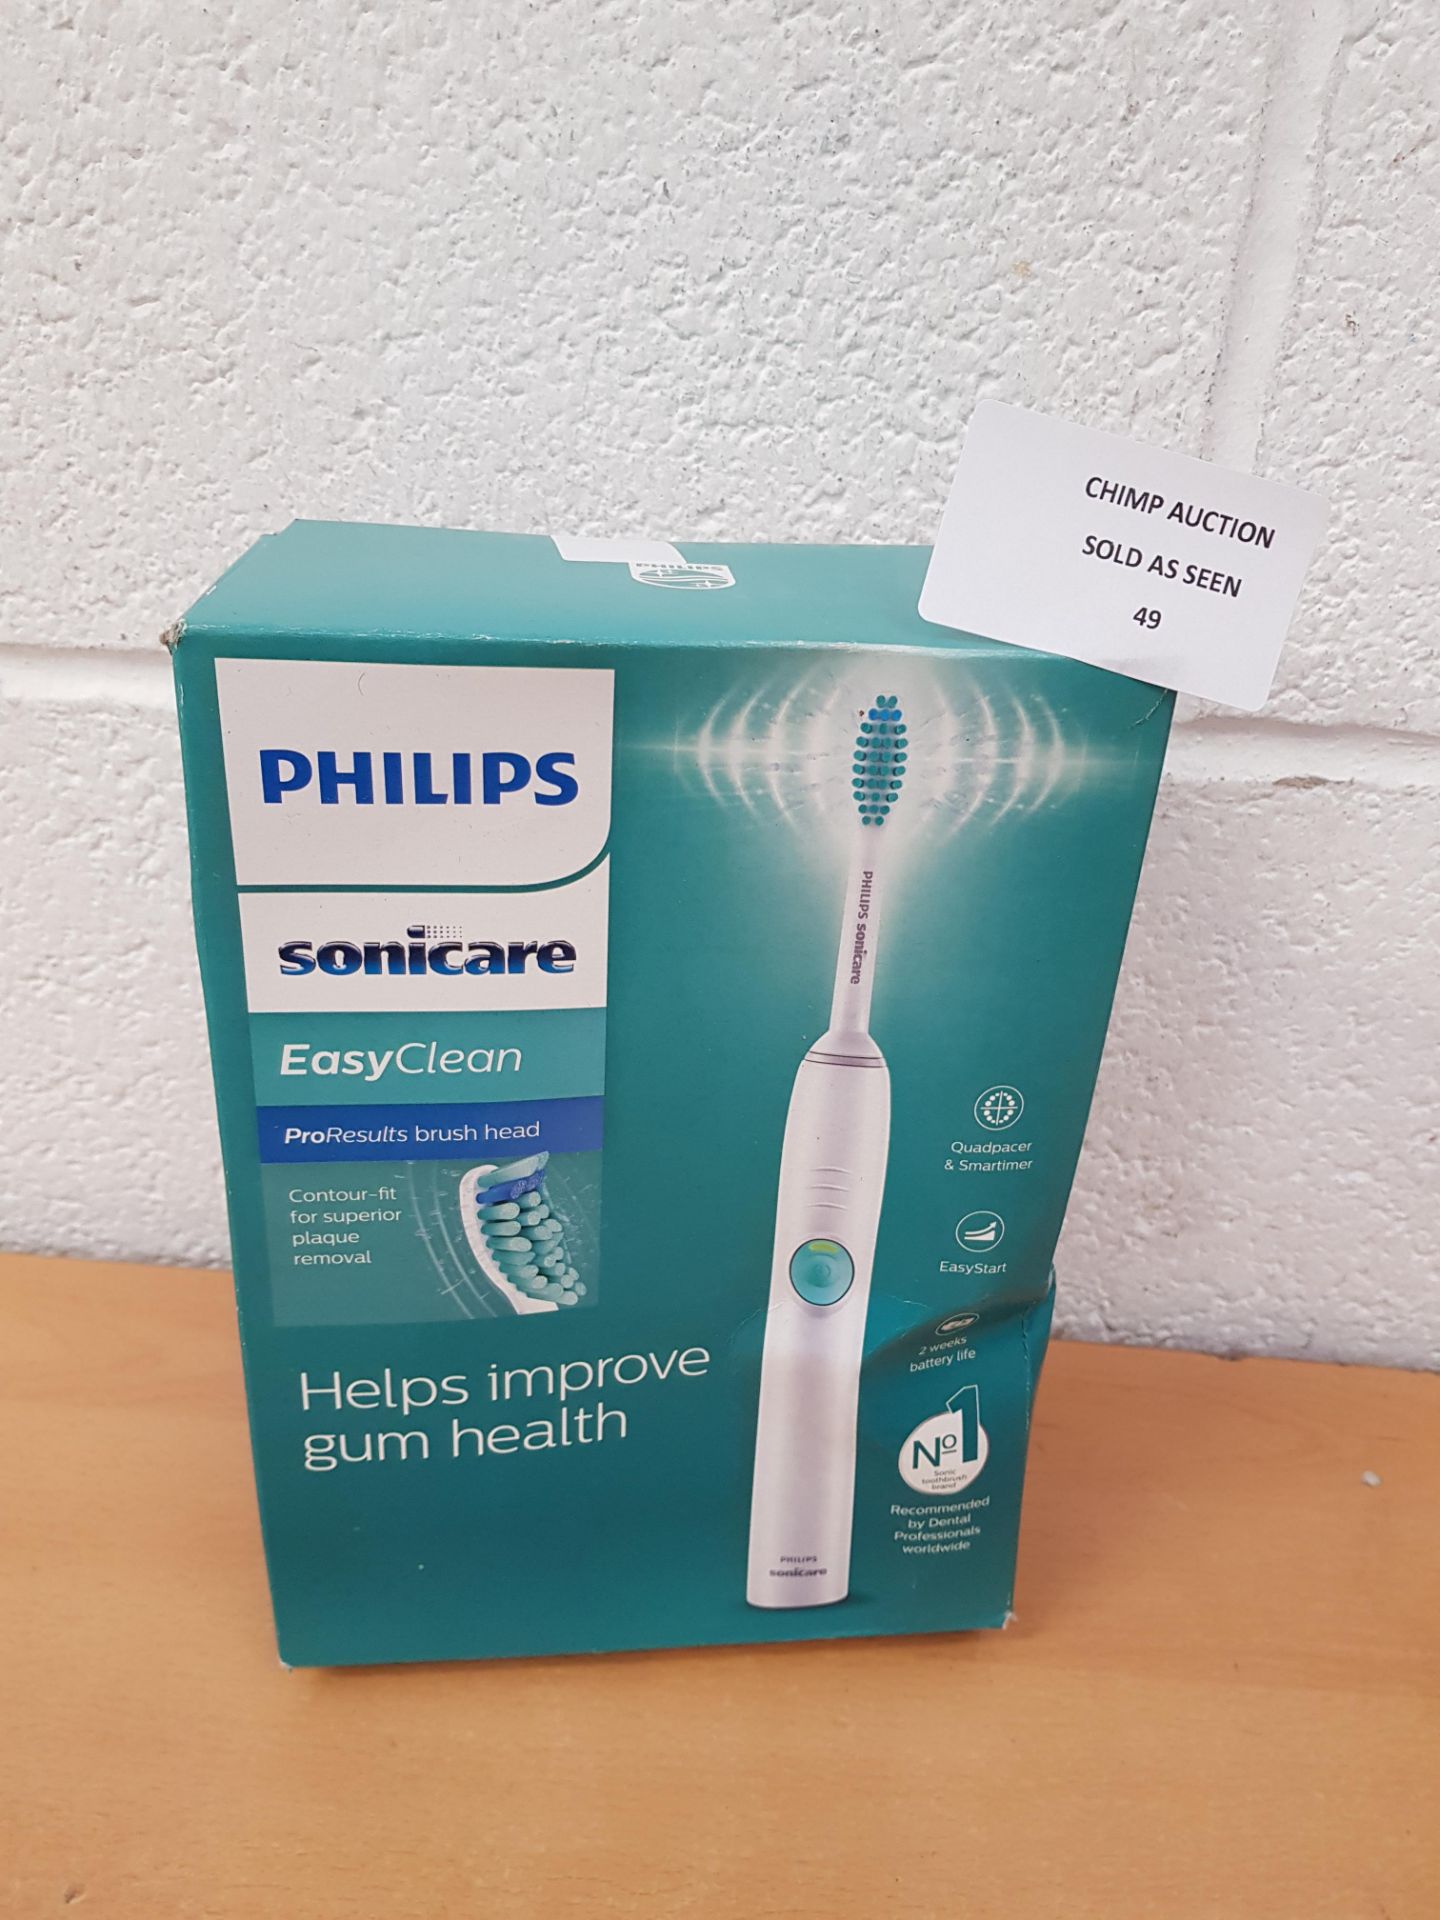 Philips Sonicare EasyClean Electric Toothbrush HX6511/50 RRP £89.99